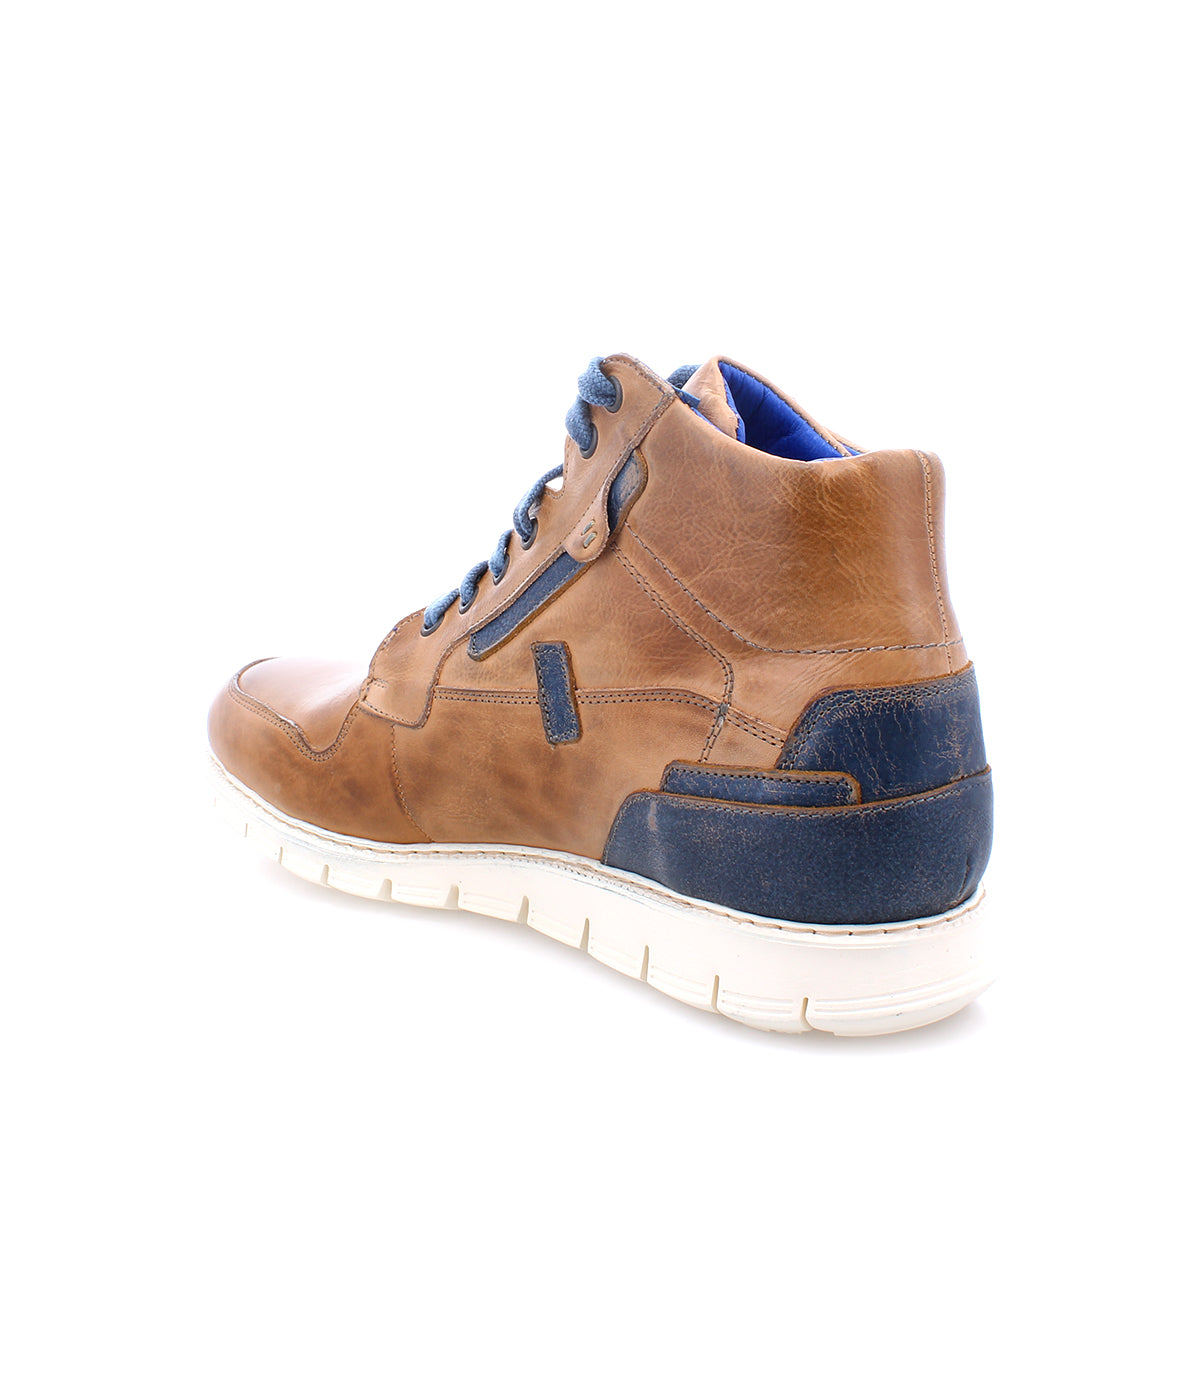 A men's lightweight brown leather Galahad sneaker by Bed Stu on a white background.